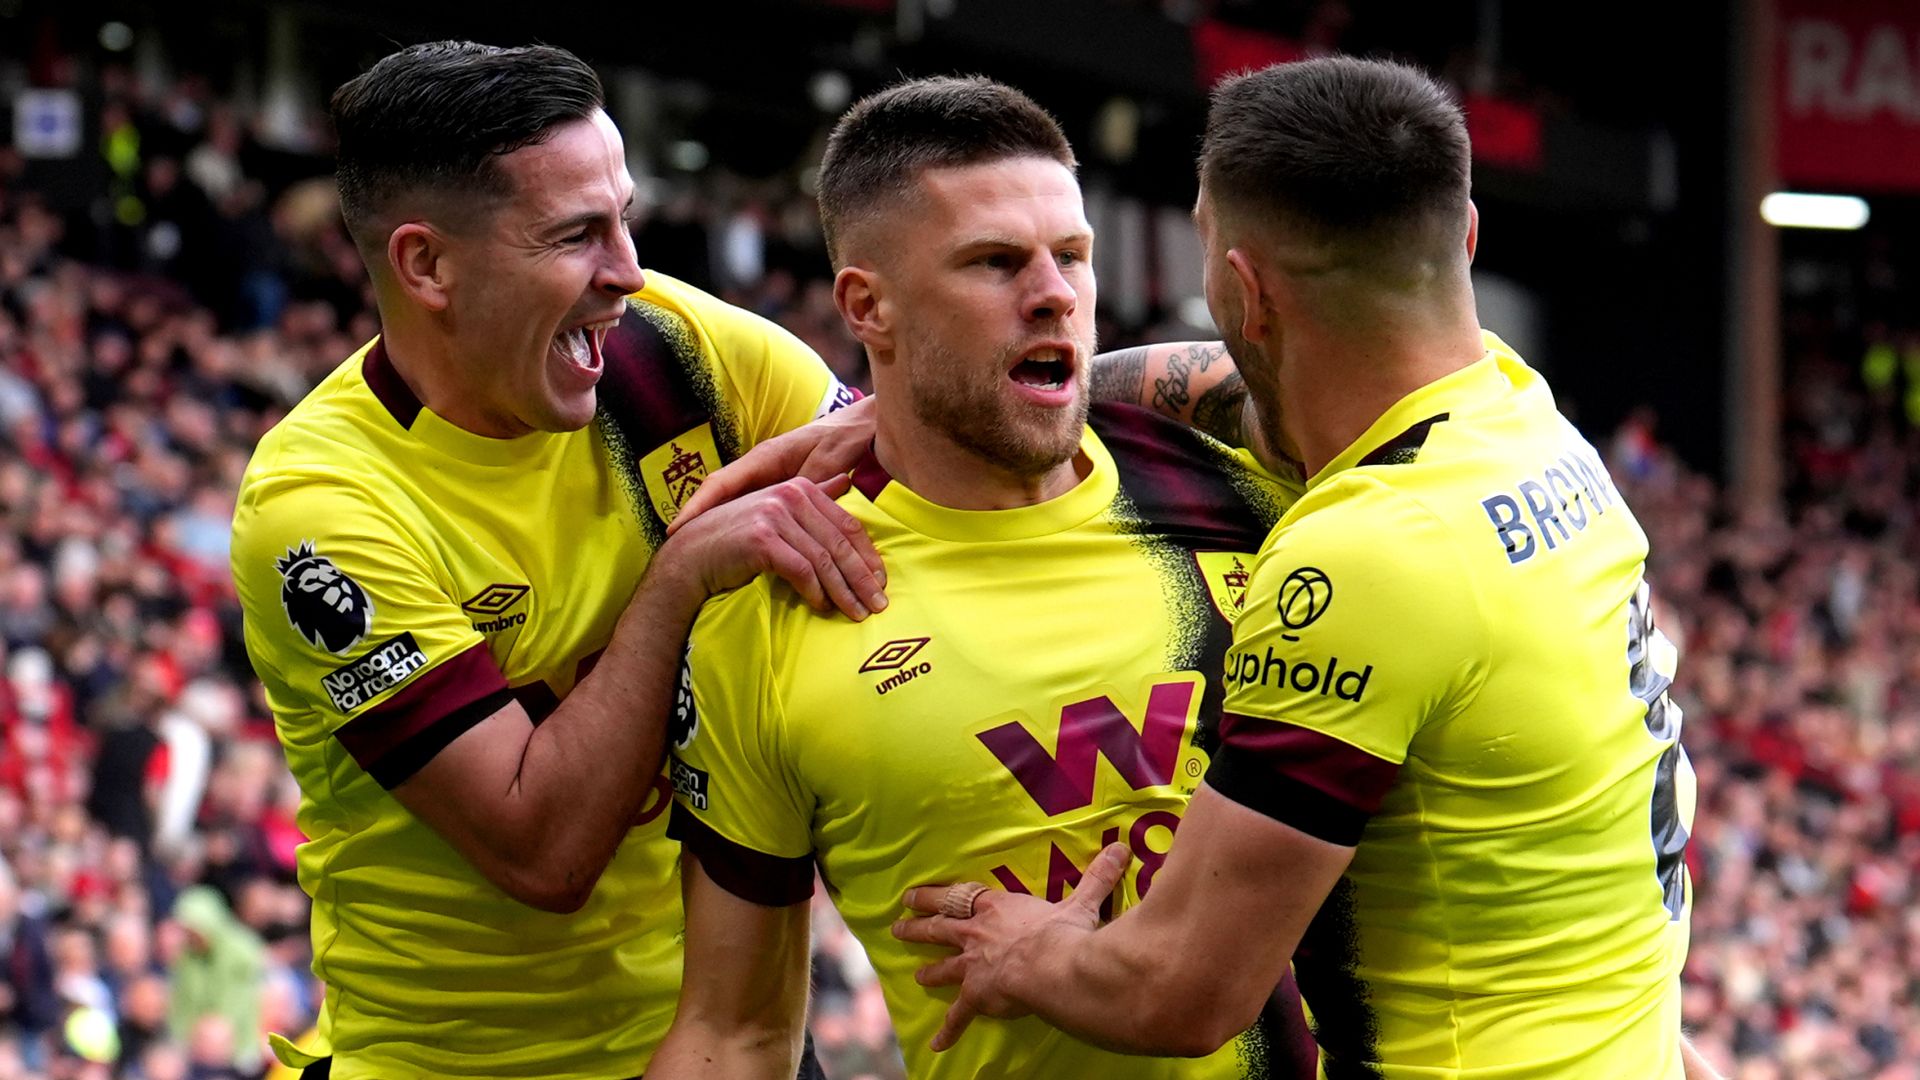 Tottenham vs Burnley preview: Clarets must win to keep hopes alive